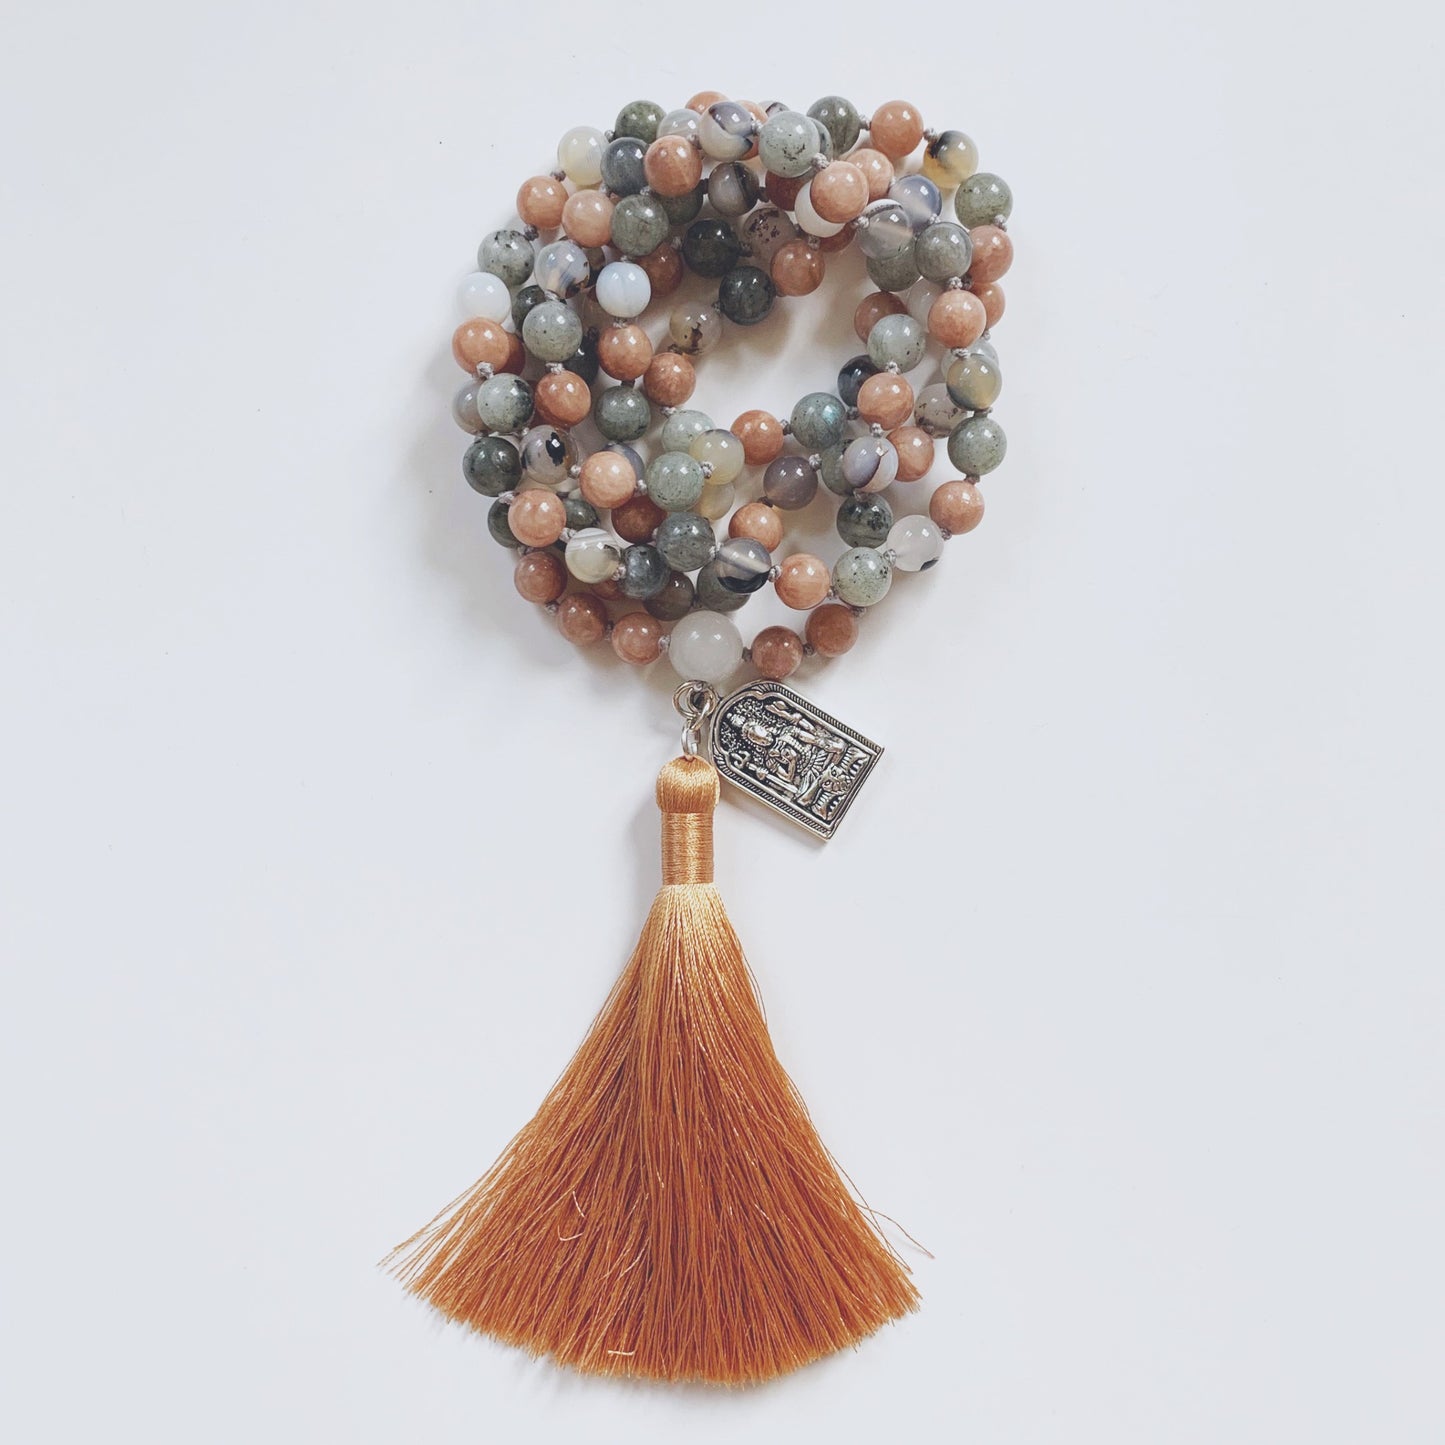 Made-To-Order Hand-Knotted Mala